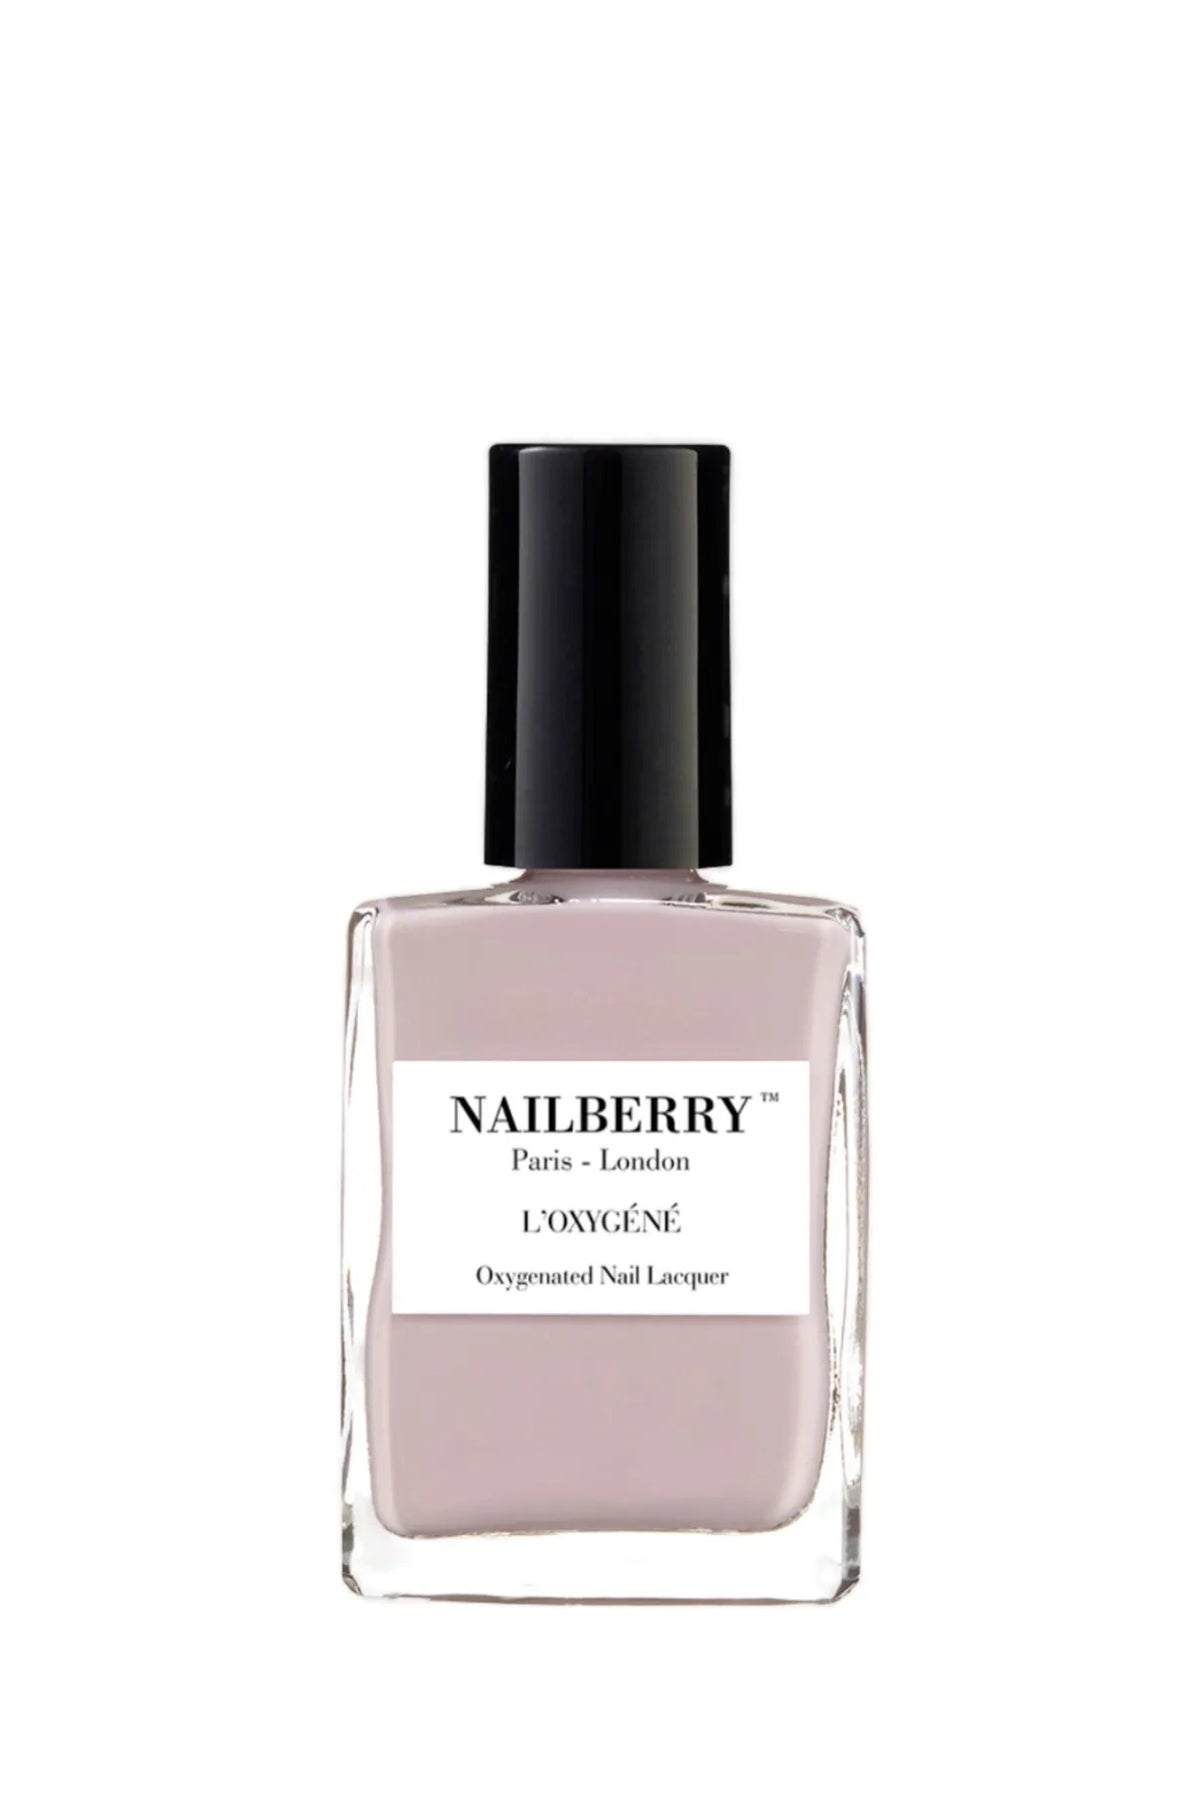 NAILBERRY Mystere